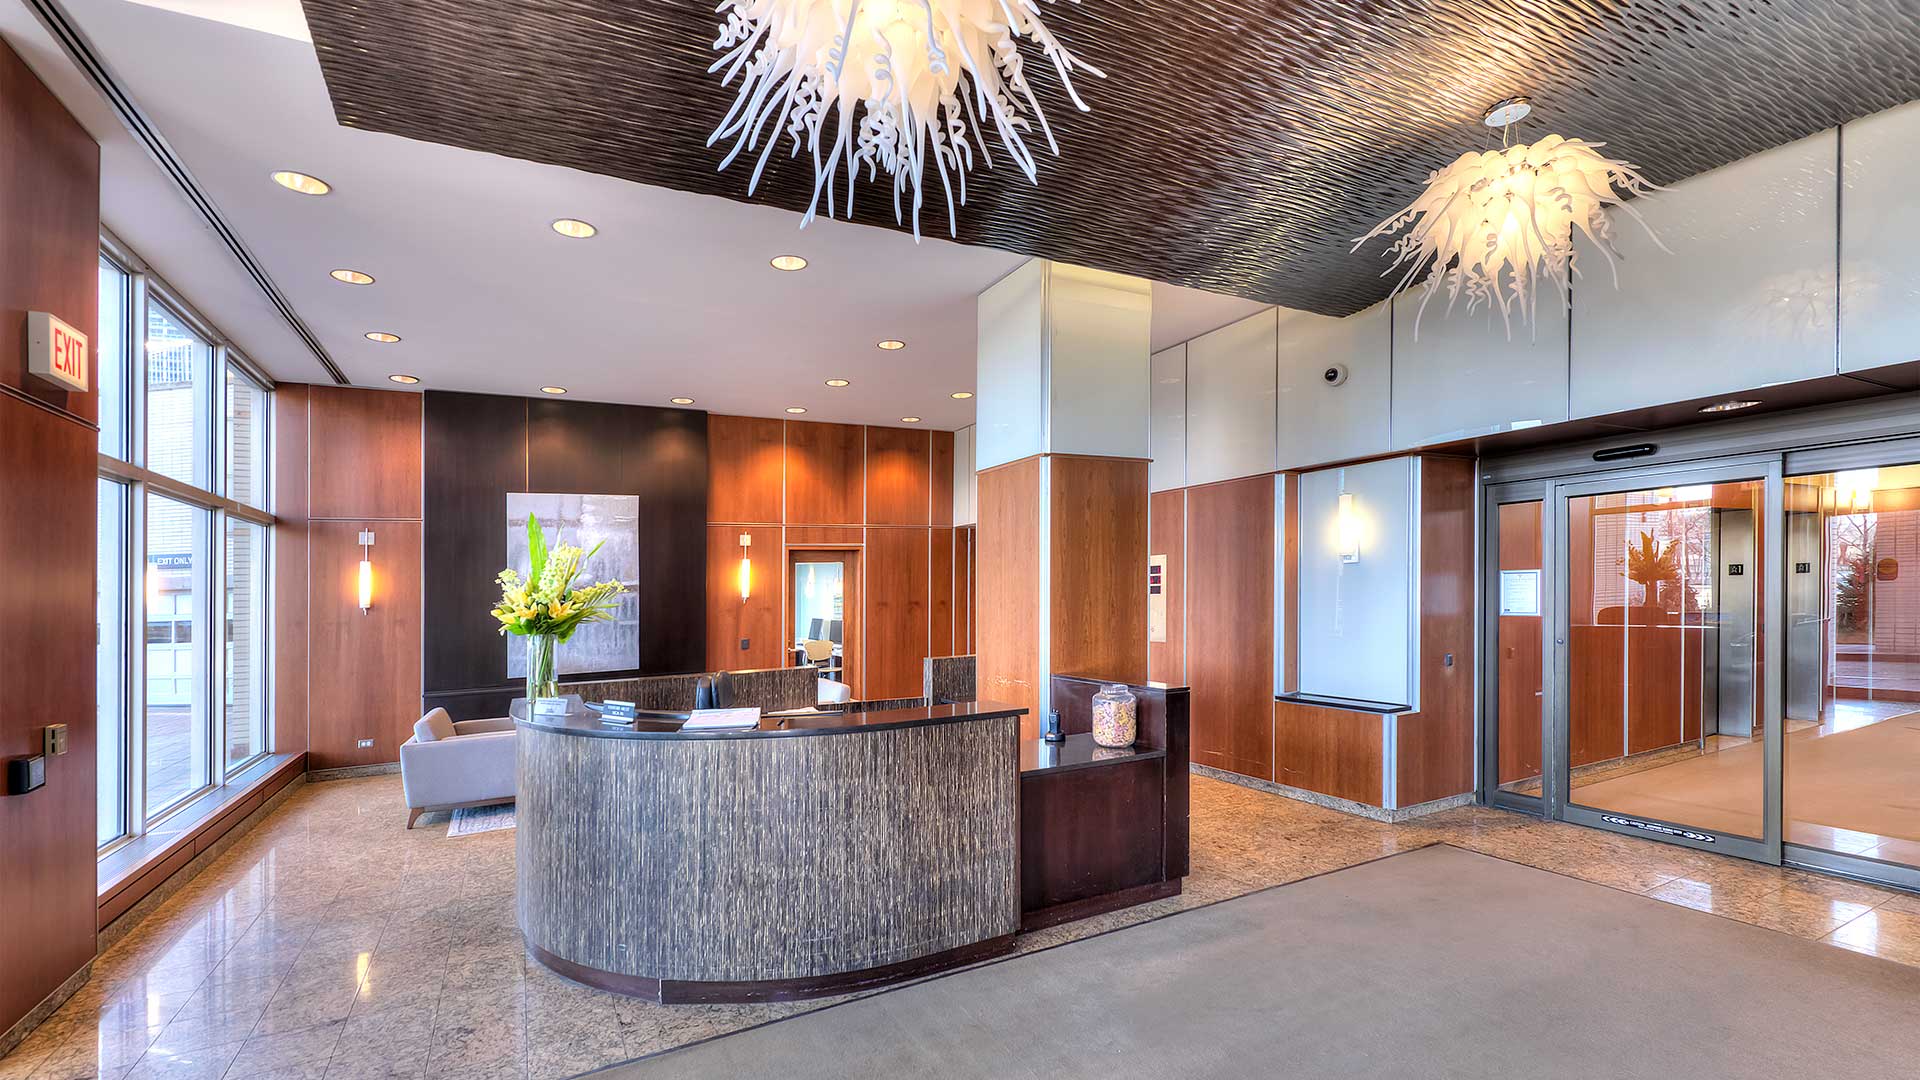 The lobby at Eleven Thirty. The front desk is in the center and a guest waiting area is behind it. The doors to the elevator lobby are seen on the right.